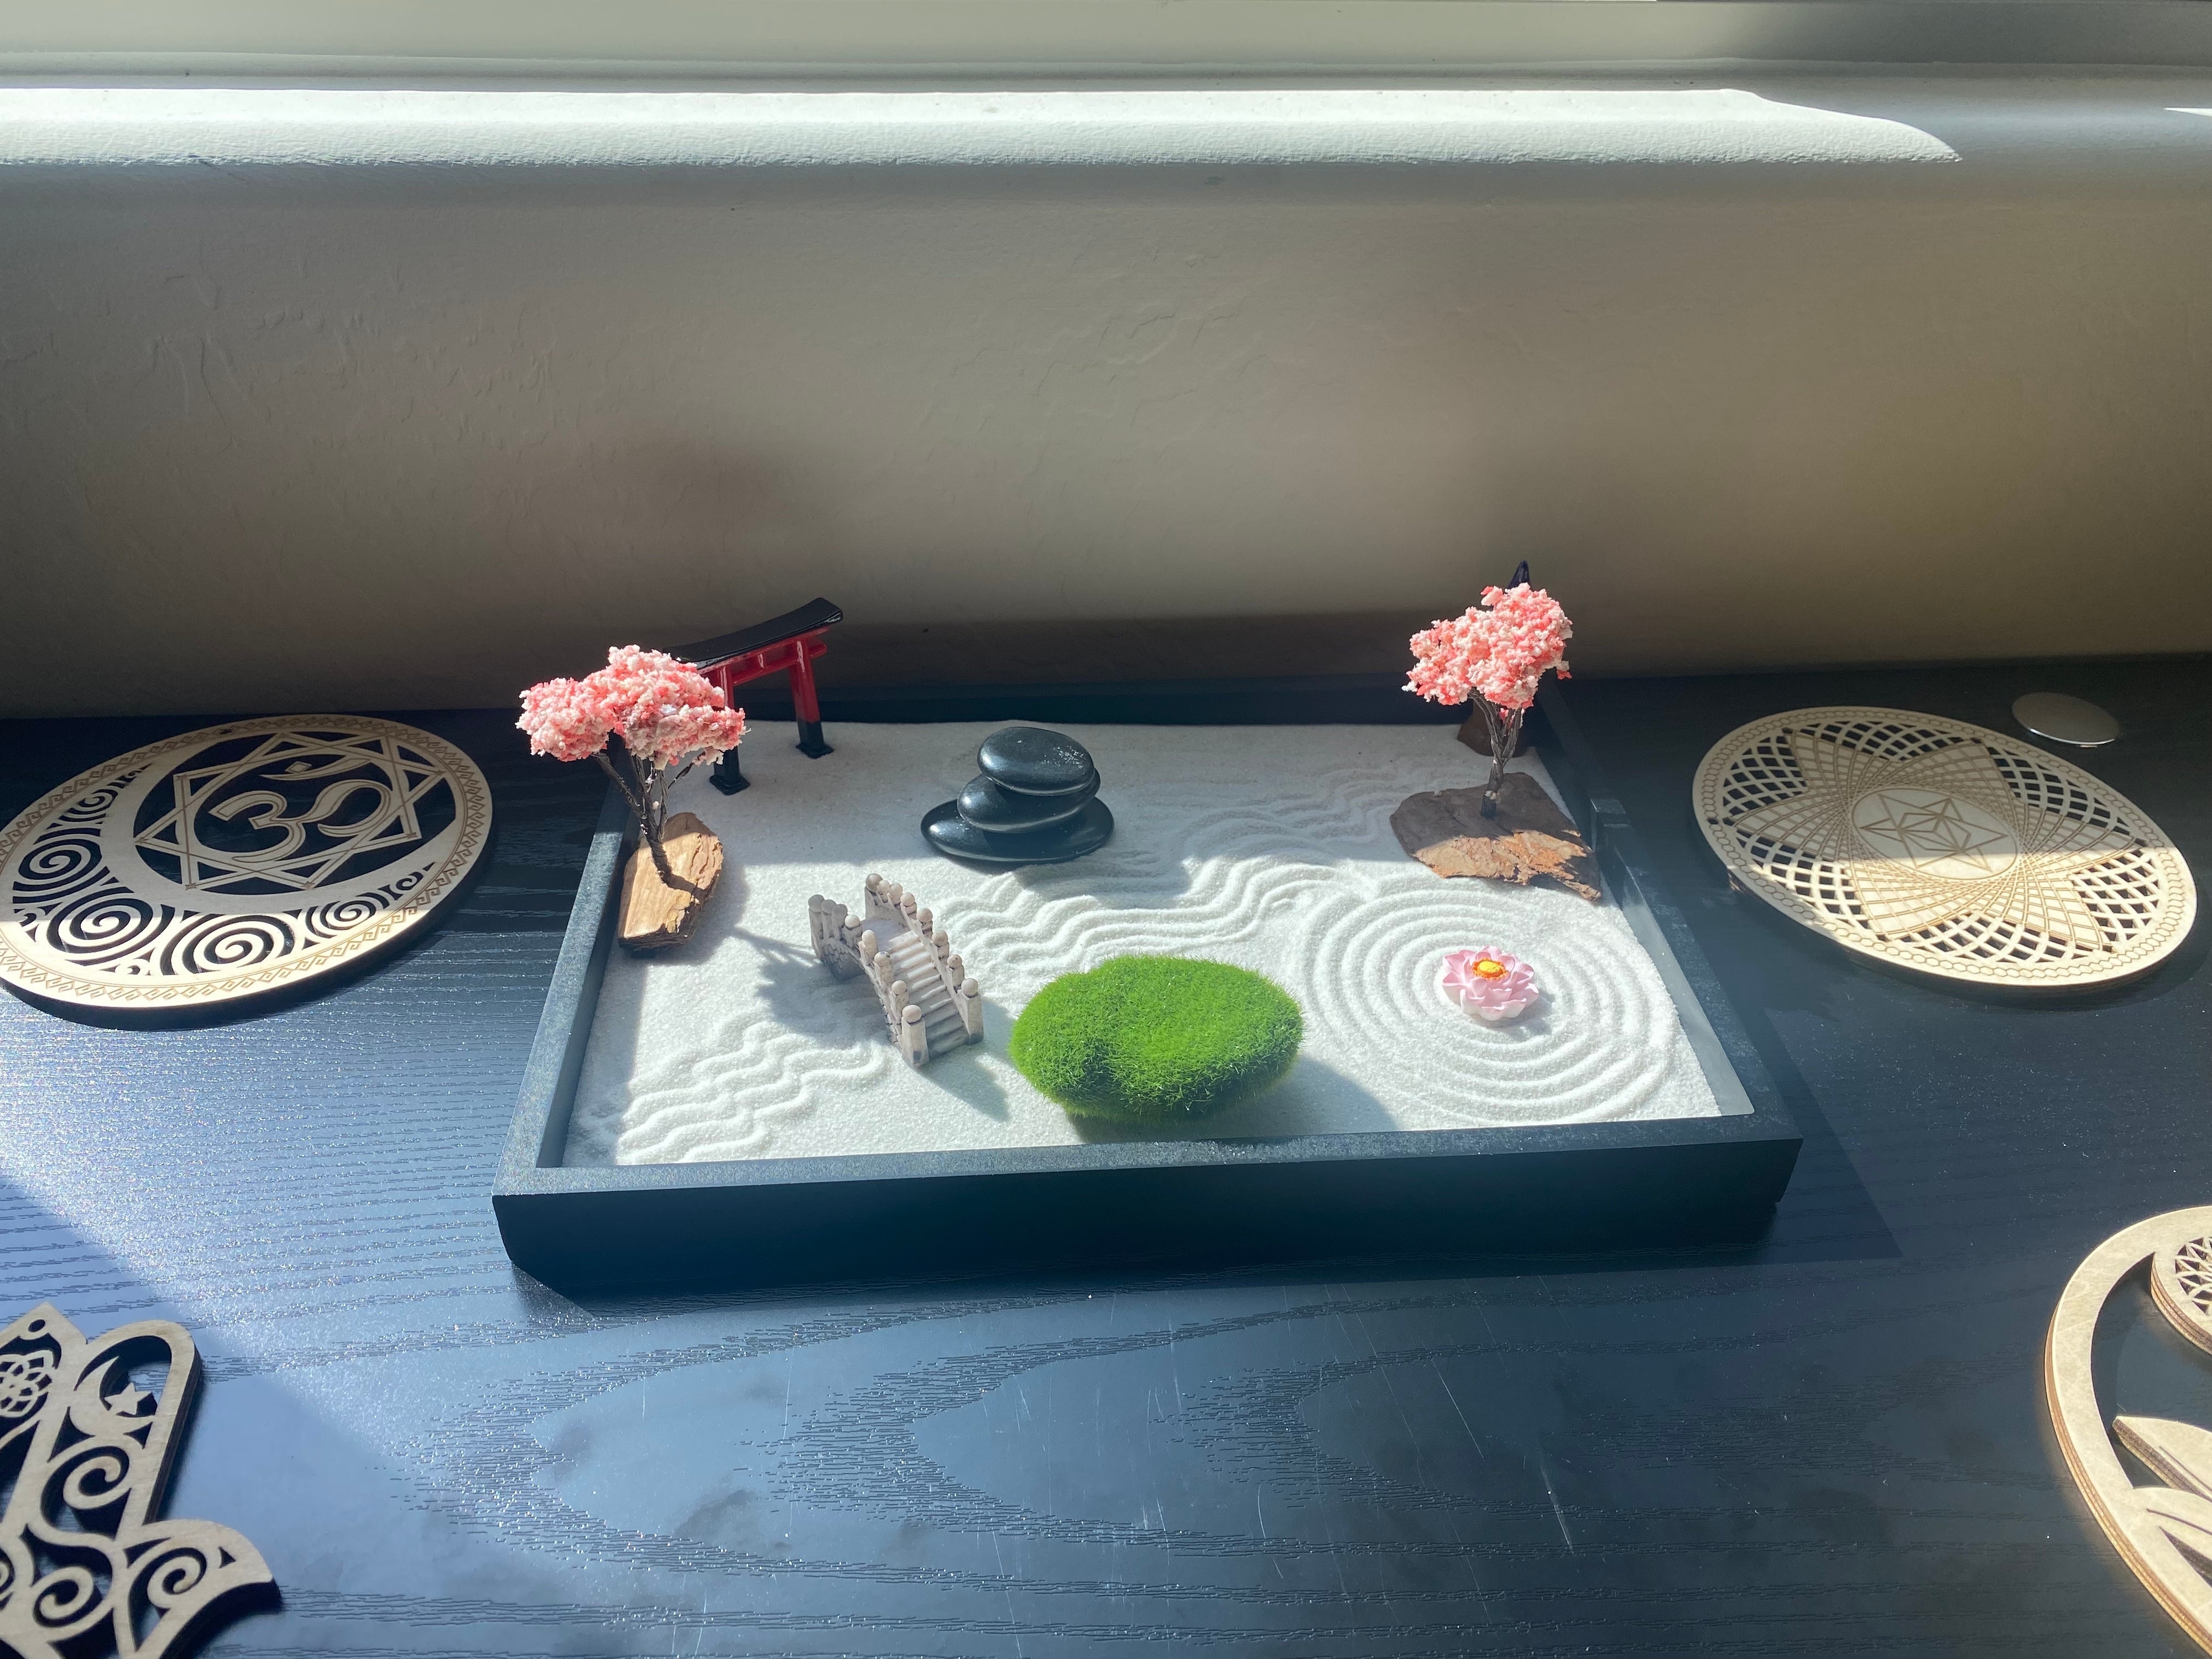 Miniature zen garden with raked sand, decorations, and moss on a sunny windowsill, beside decorative plates. Ideal for mindful home decor